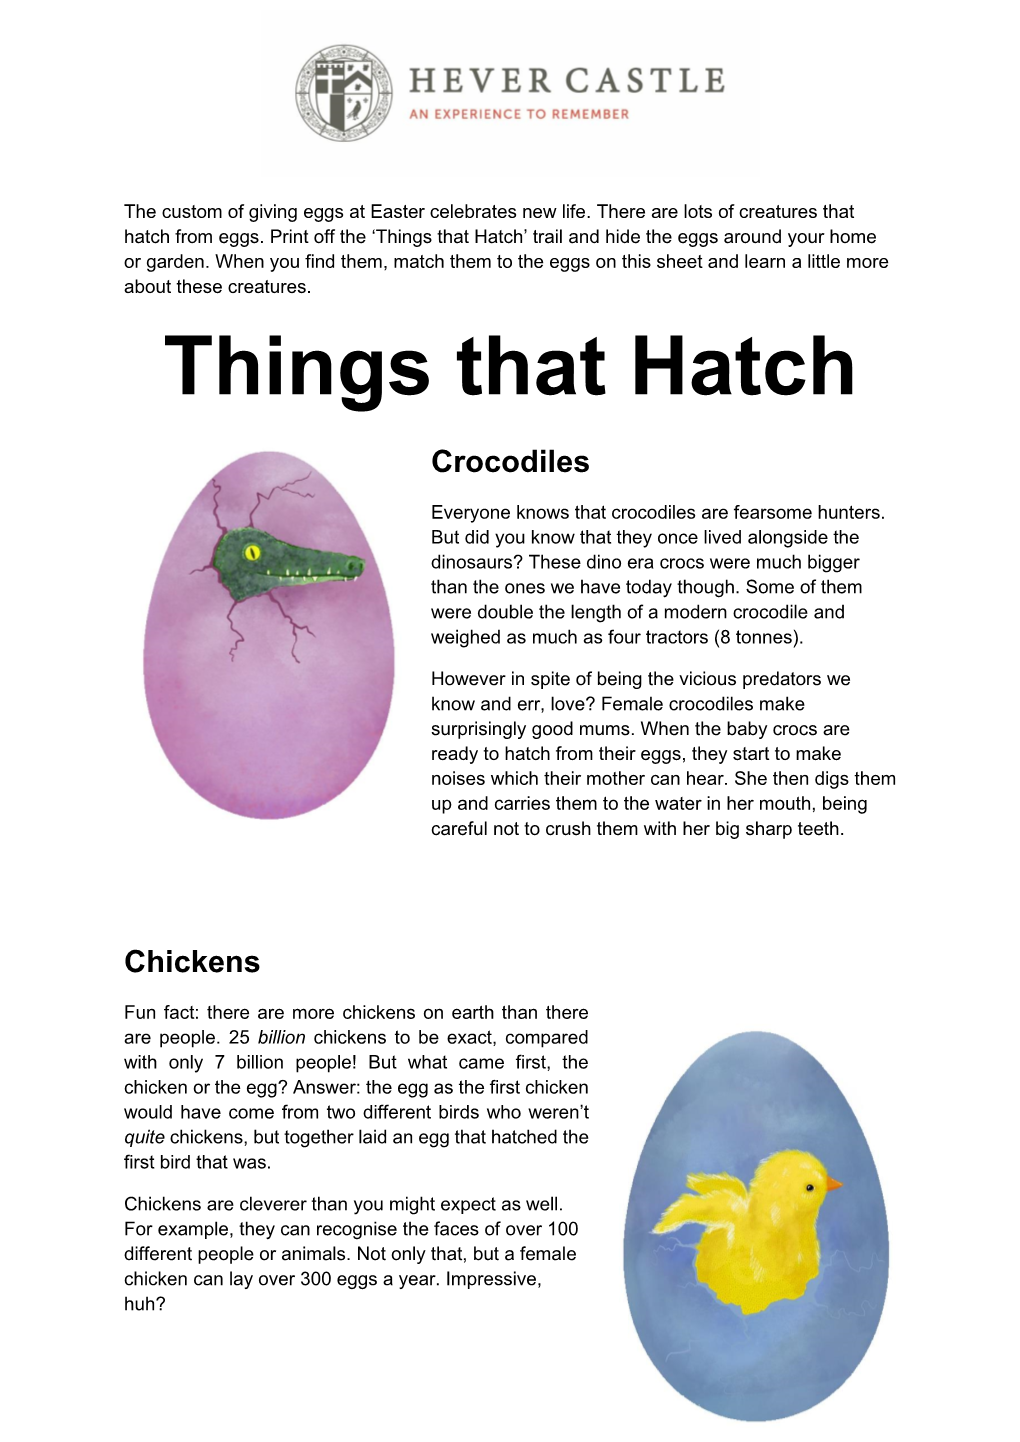 Things That Hatch’ Trail and Hide the Eggs Around Your Home Or Garden